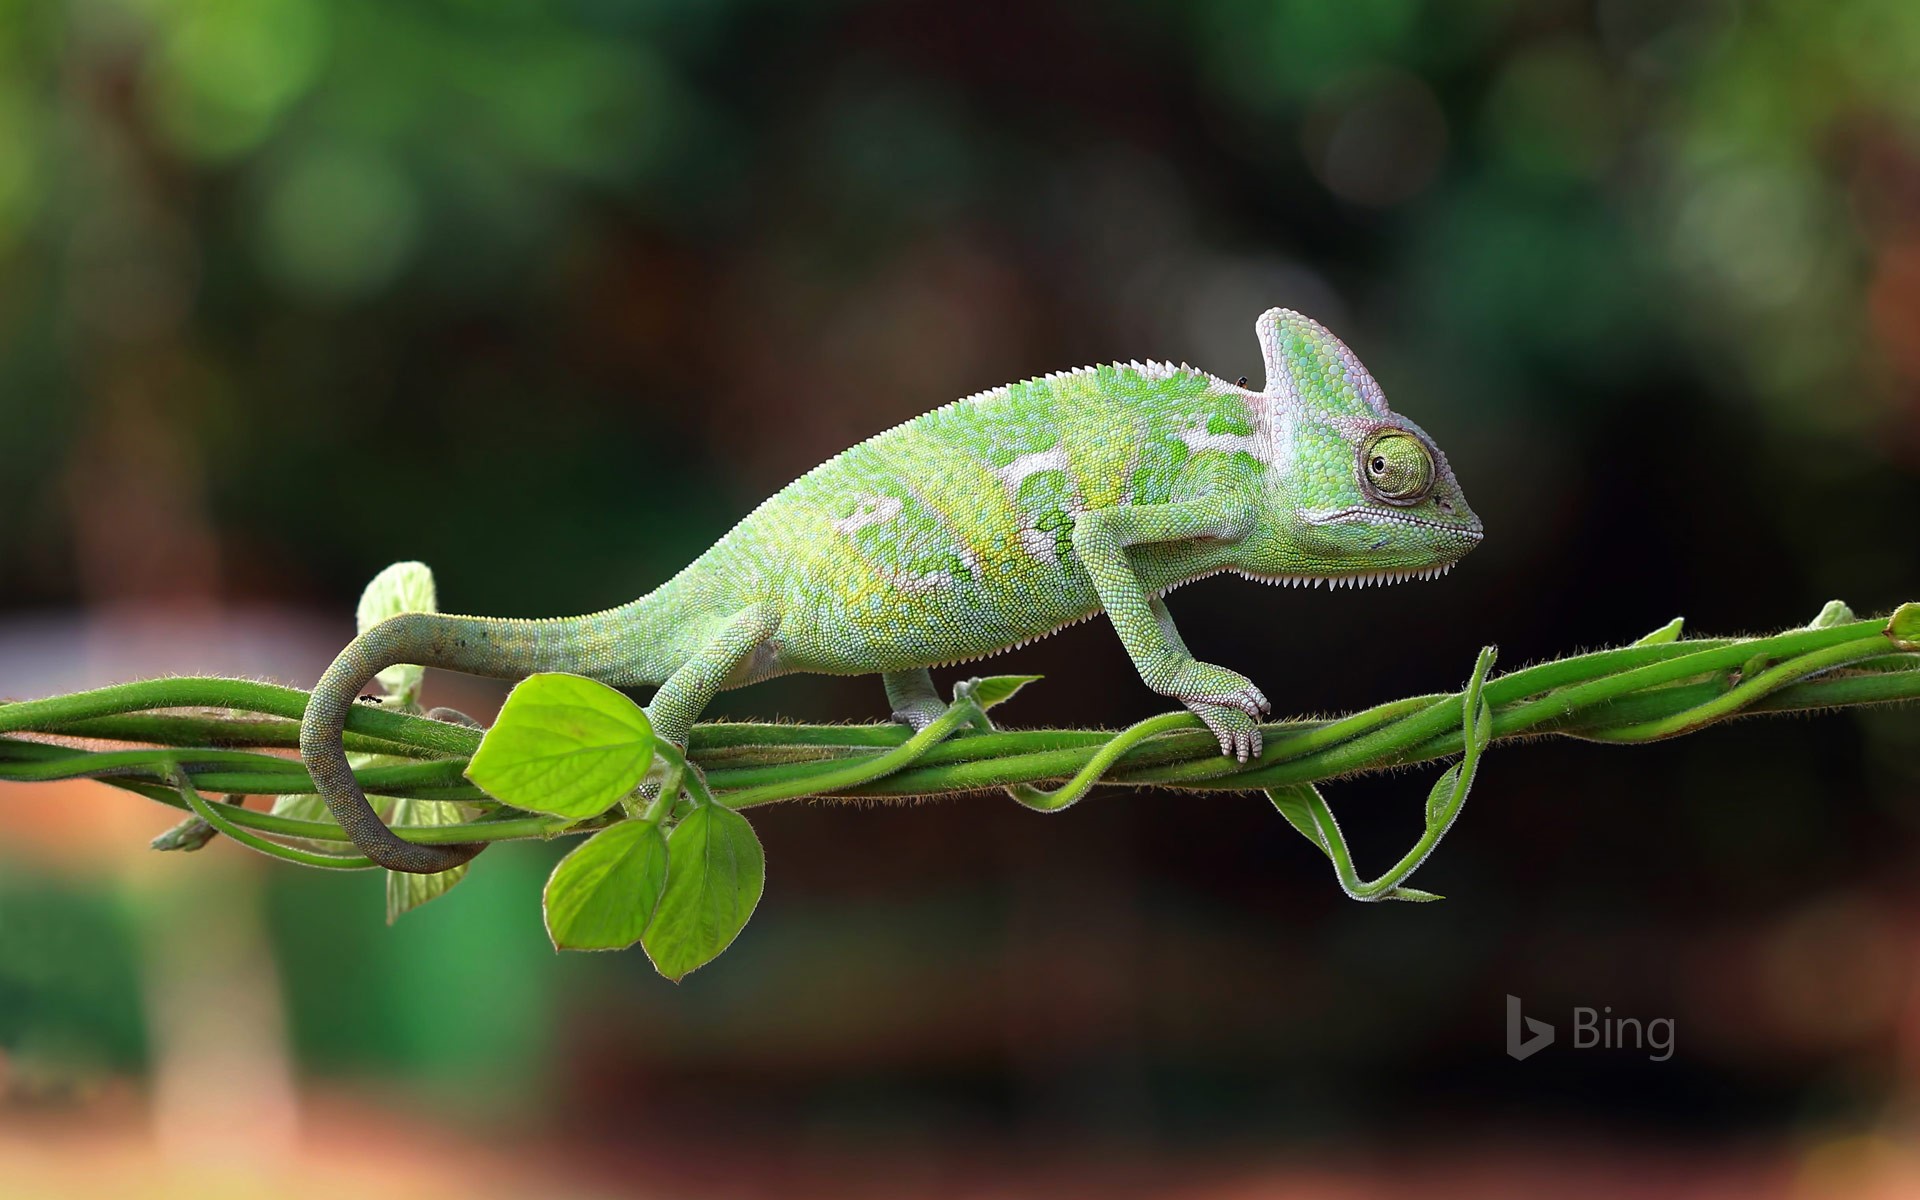 Chameleon walking on a plant, Indonesia